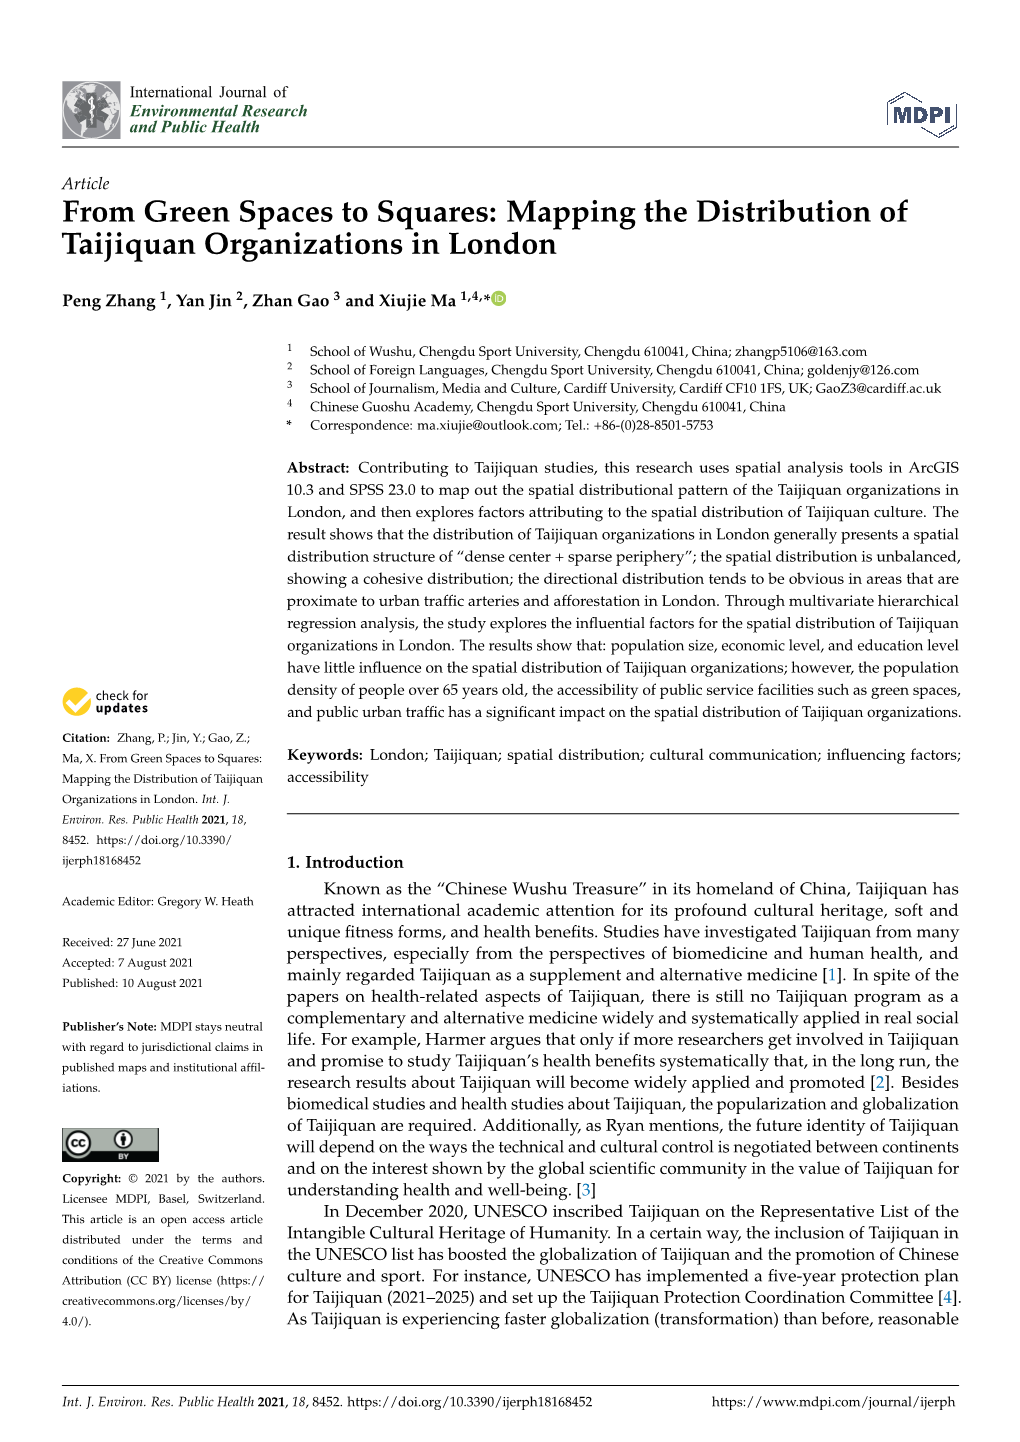 Mapping the Distribution of Taijiquan Organizations in London